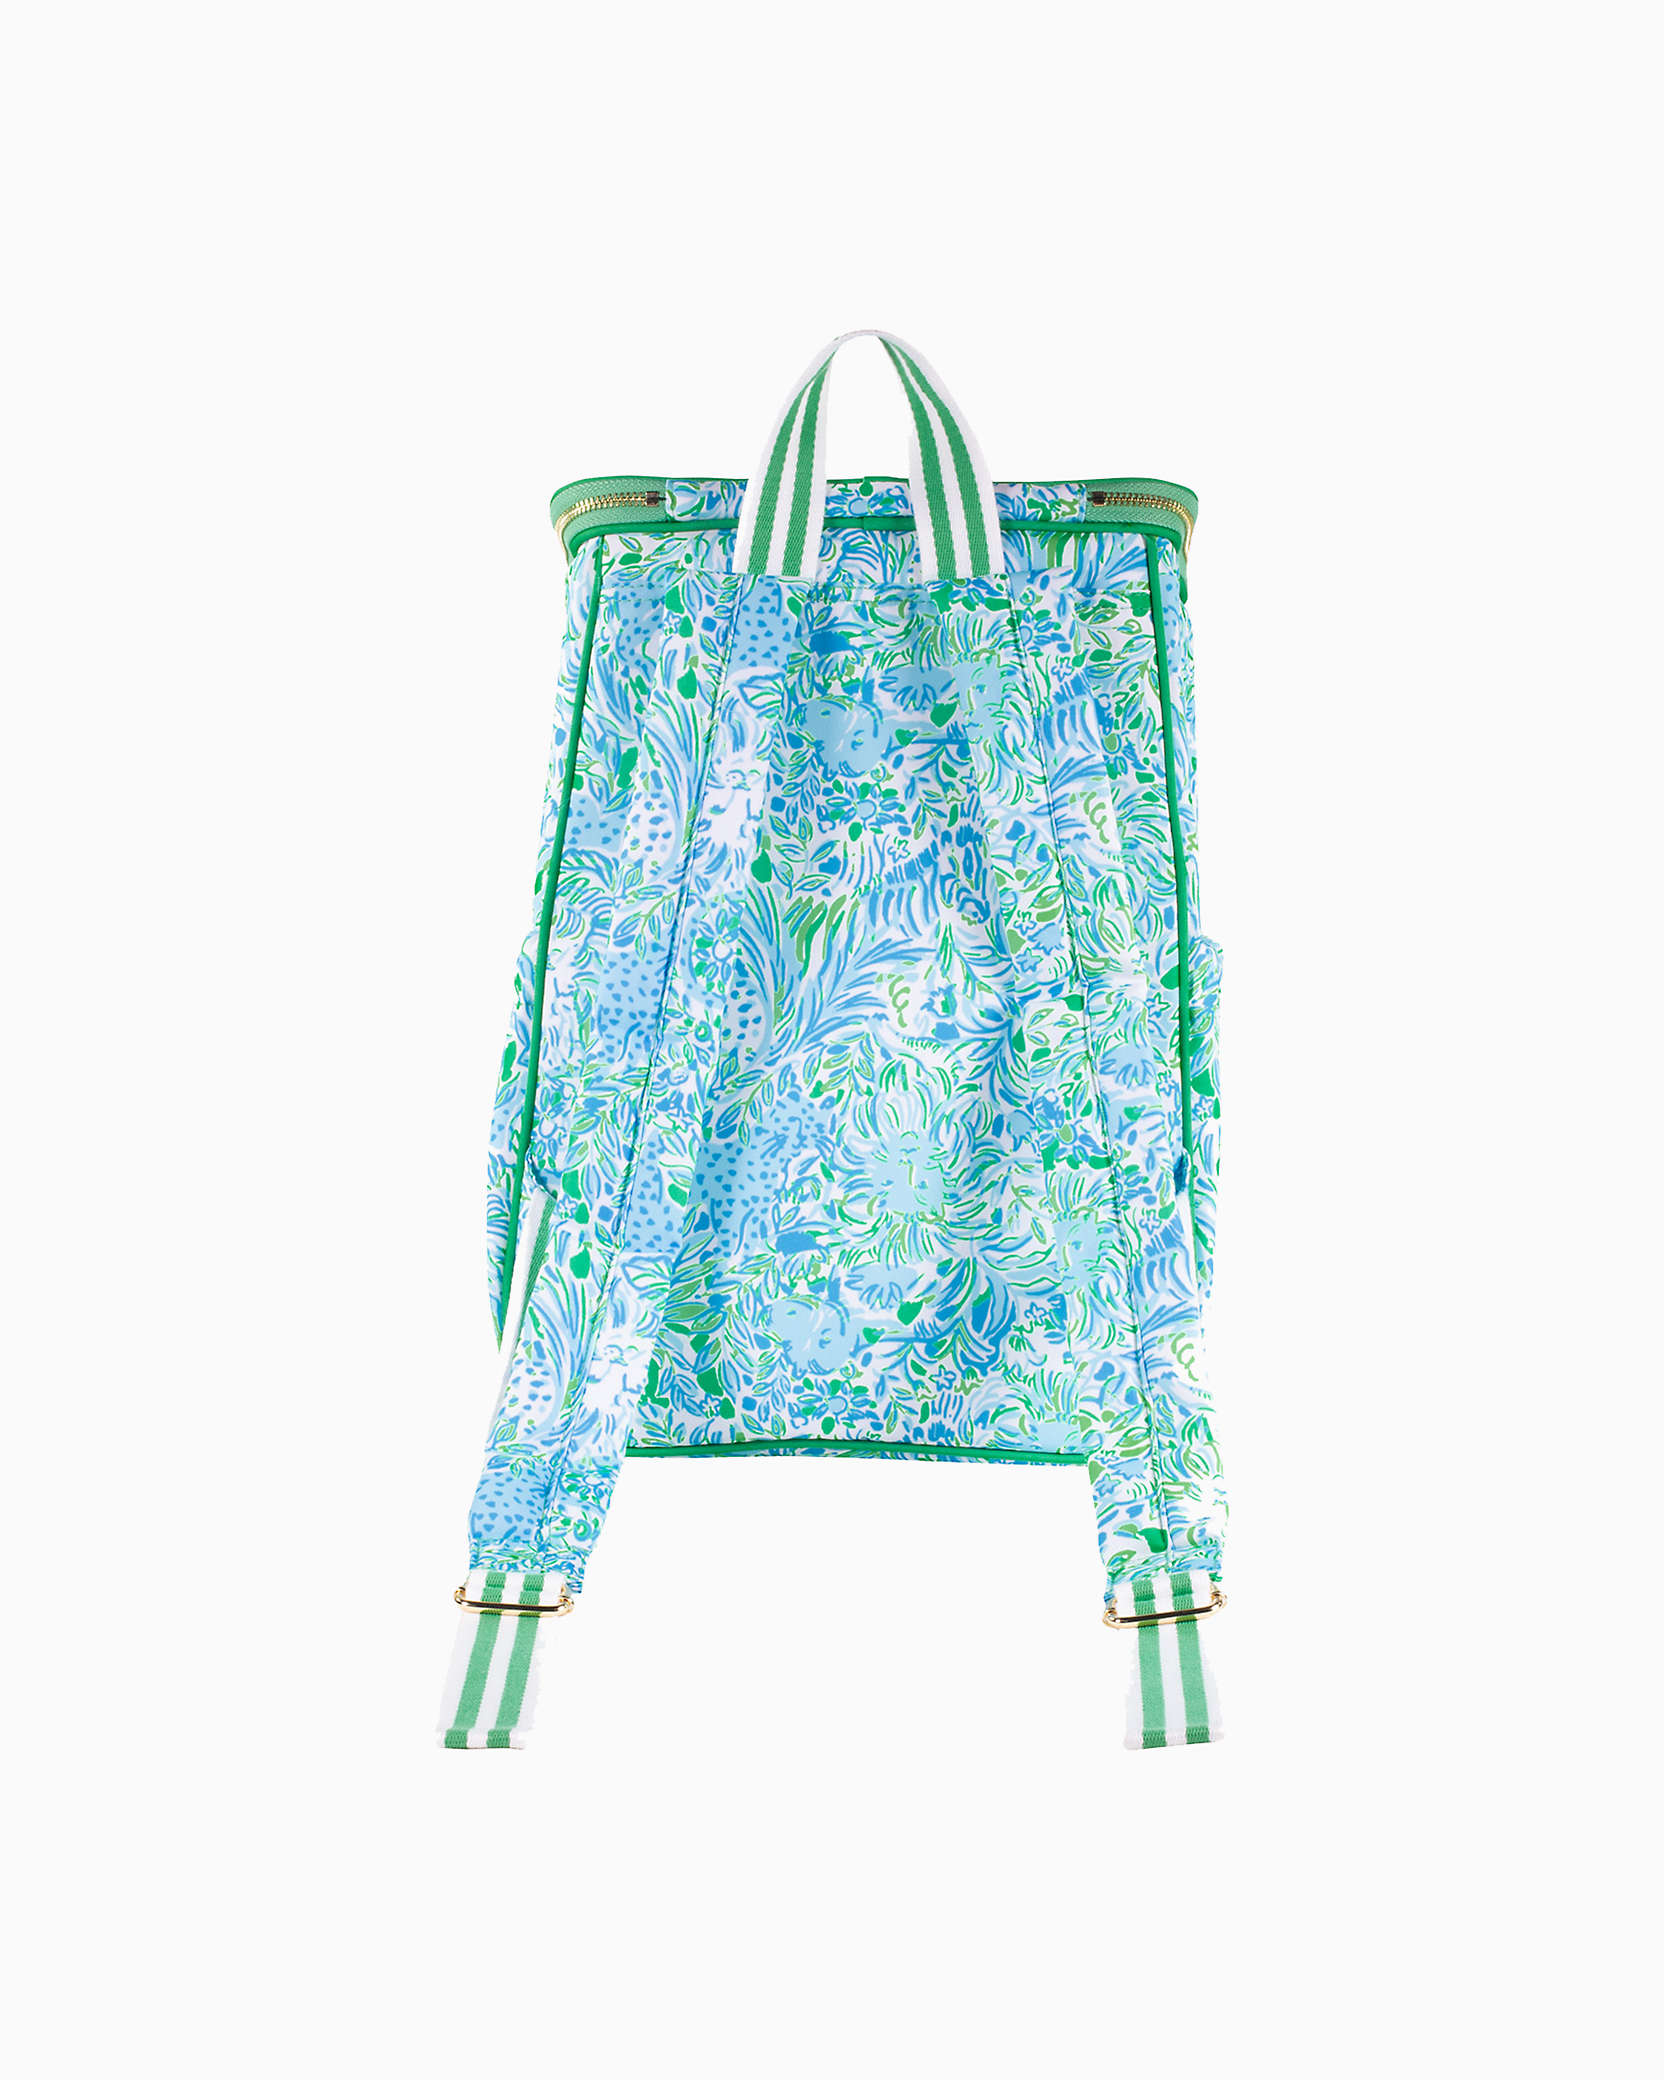 Shop Lilly Pulitzer Backpack Cooler In Hydra Blue Dandy Lions